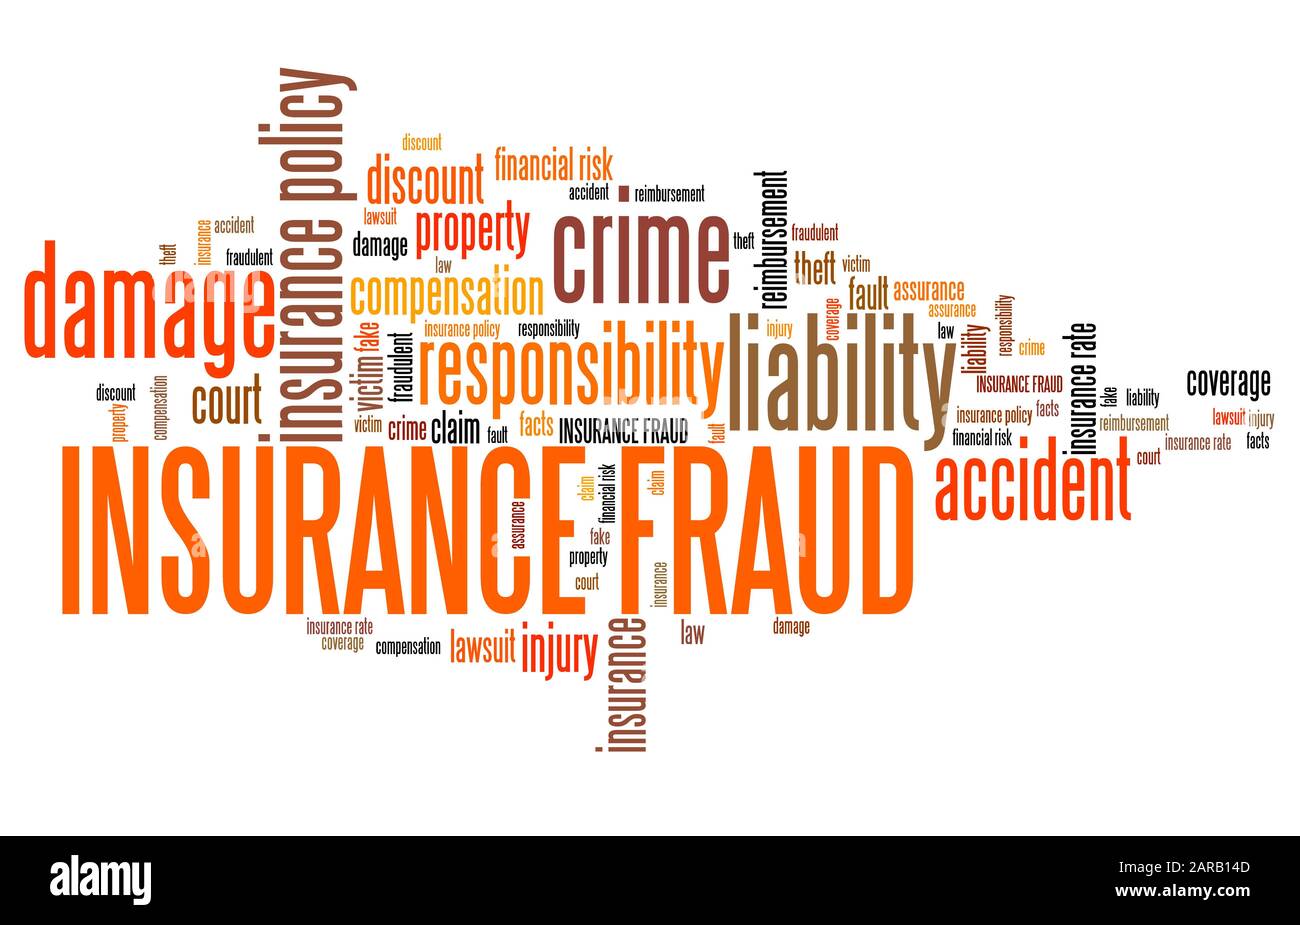 Insurance fraud - financial crime. Word cloud concept. Stock Photo